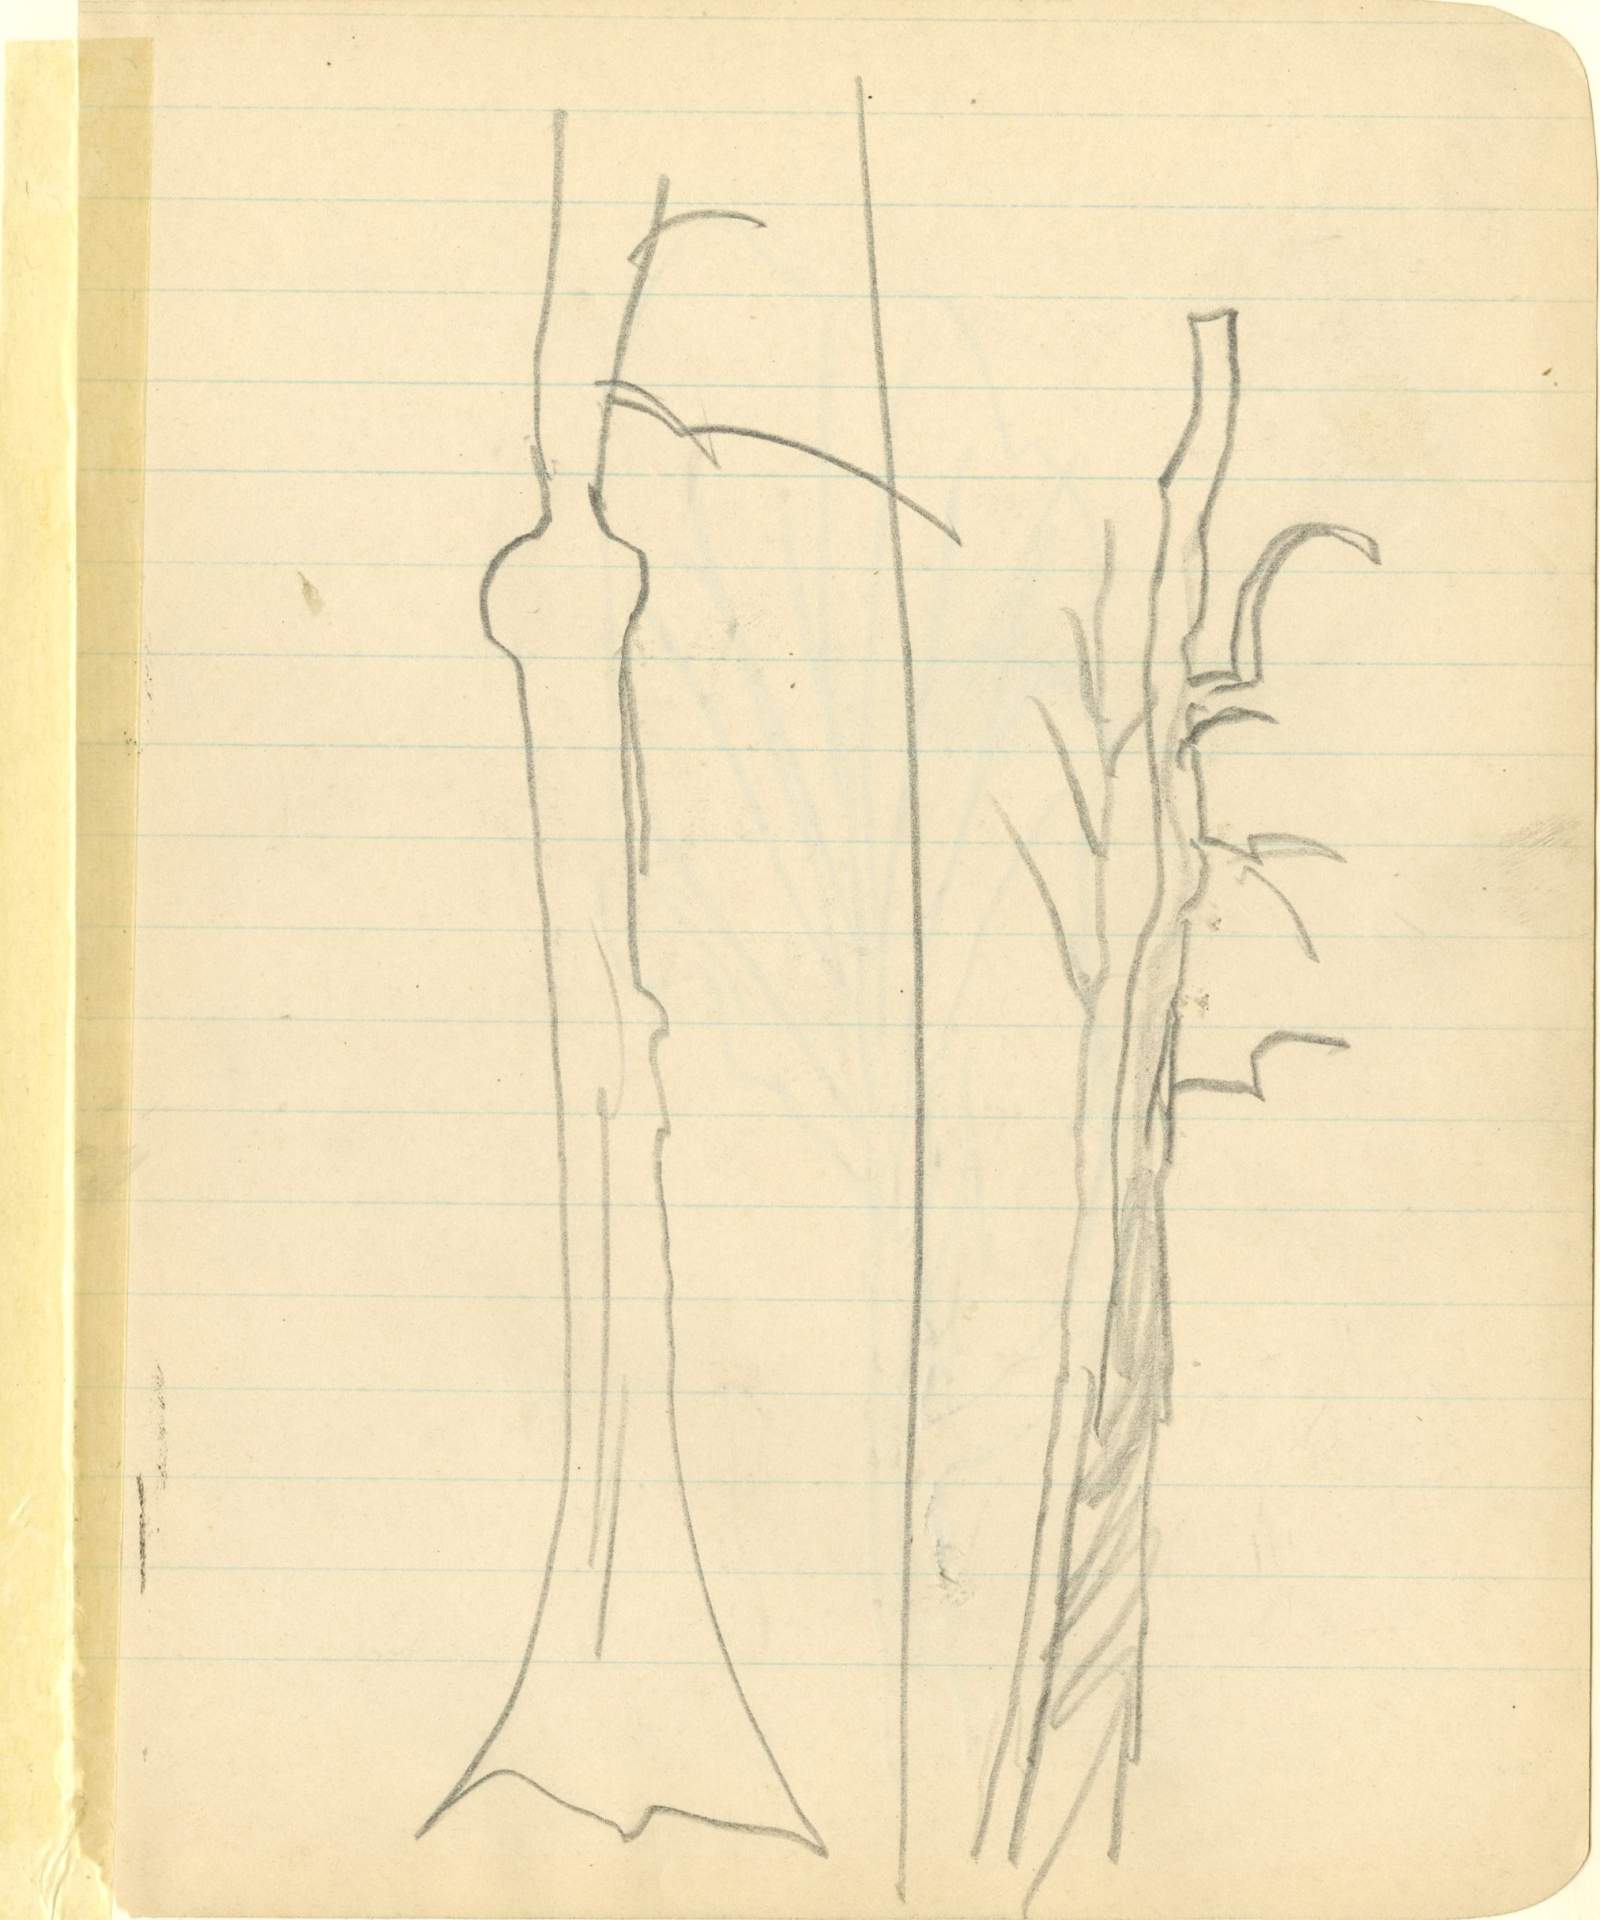 Sketch comparison of two tall trees